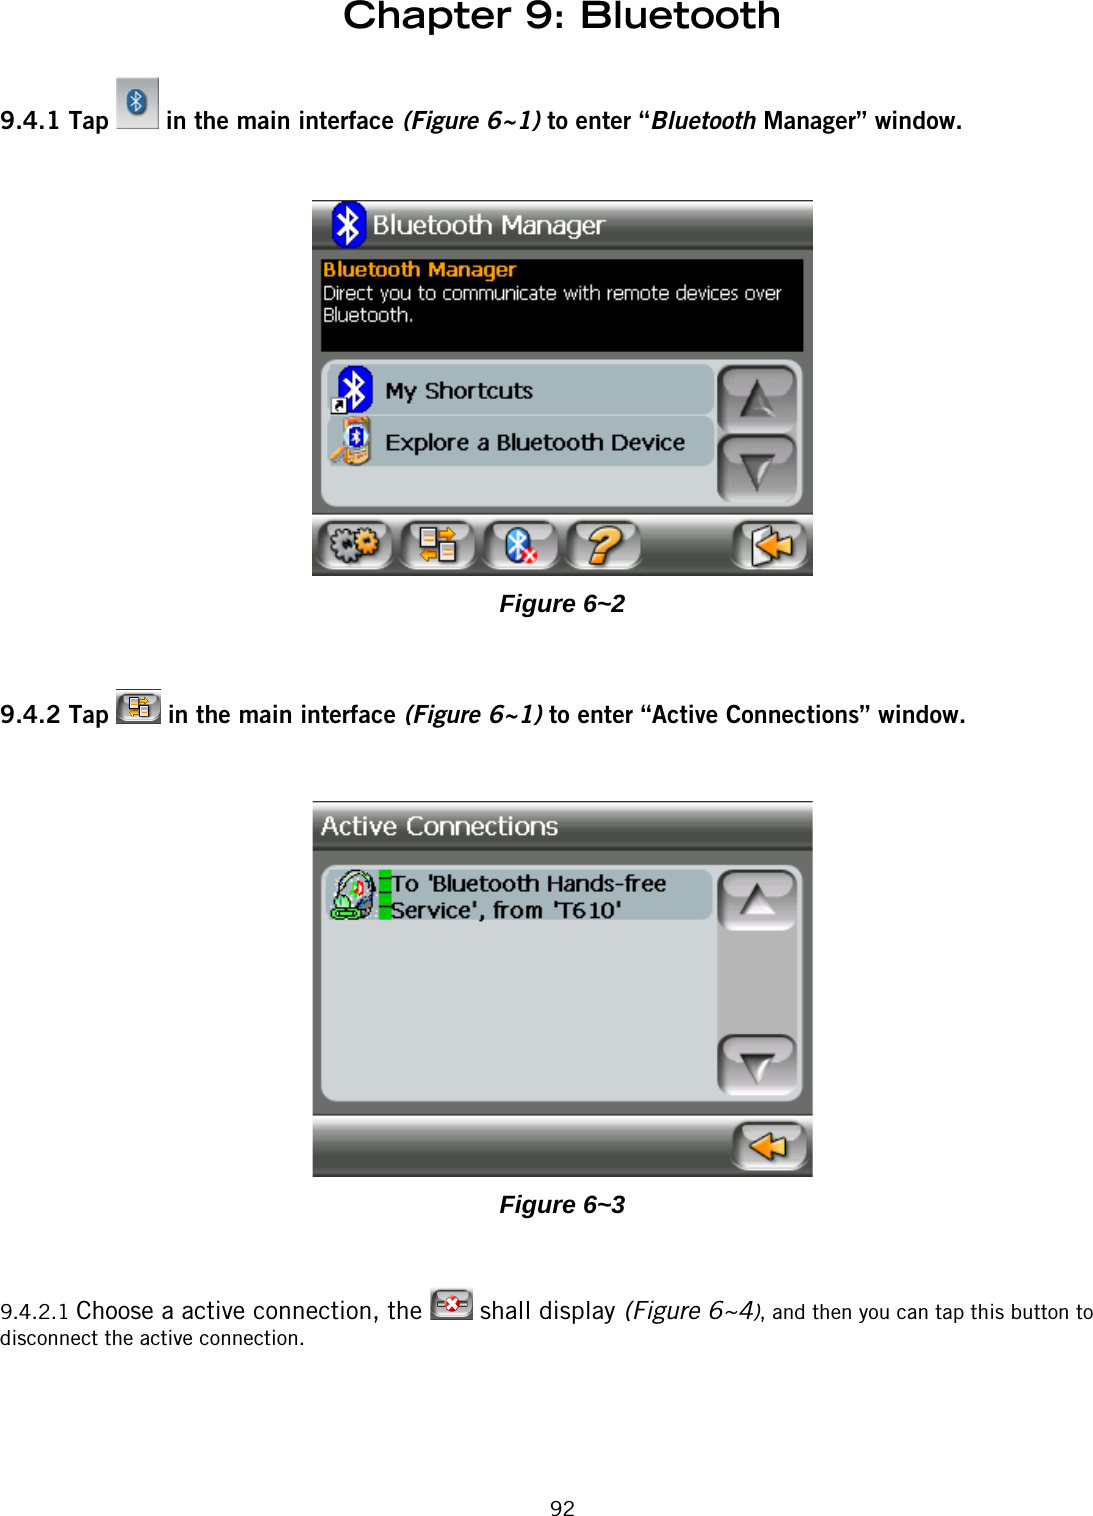 Chapter 9: Bluetooth929.4.1 Tap   in the main interface (Figure 6~1) to enter “Bluetooth Manager” window.Figure 6~29.4.2 Tap   in the main interface (Figure 6~1) to enter “Active Connections” window.Figure 6~39.4.2.1 Choose a active connection, the   shall display (Figure 6~4), and then you can tap this button to disconnect the active connection.